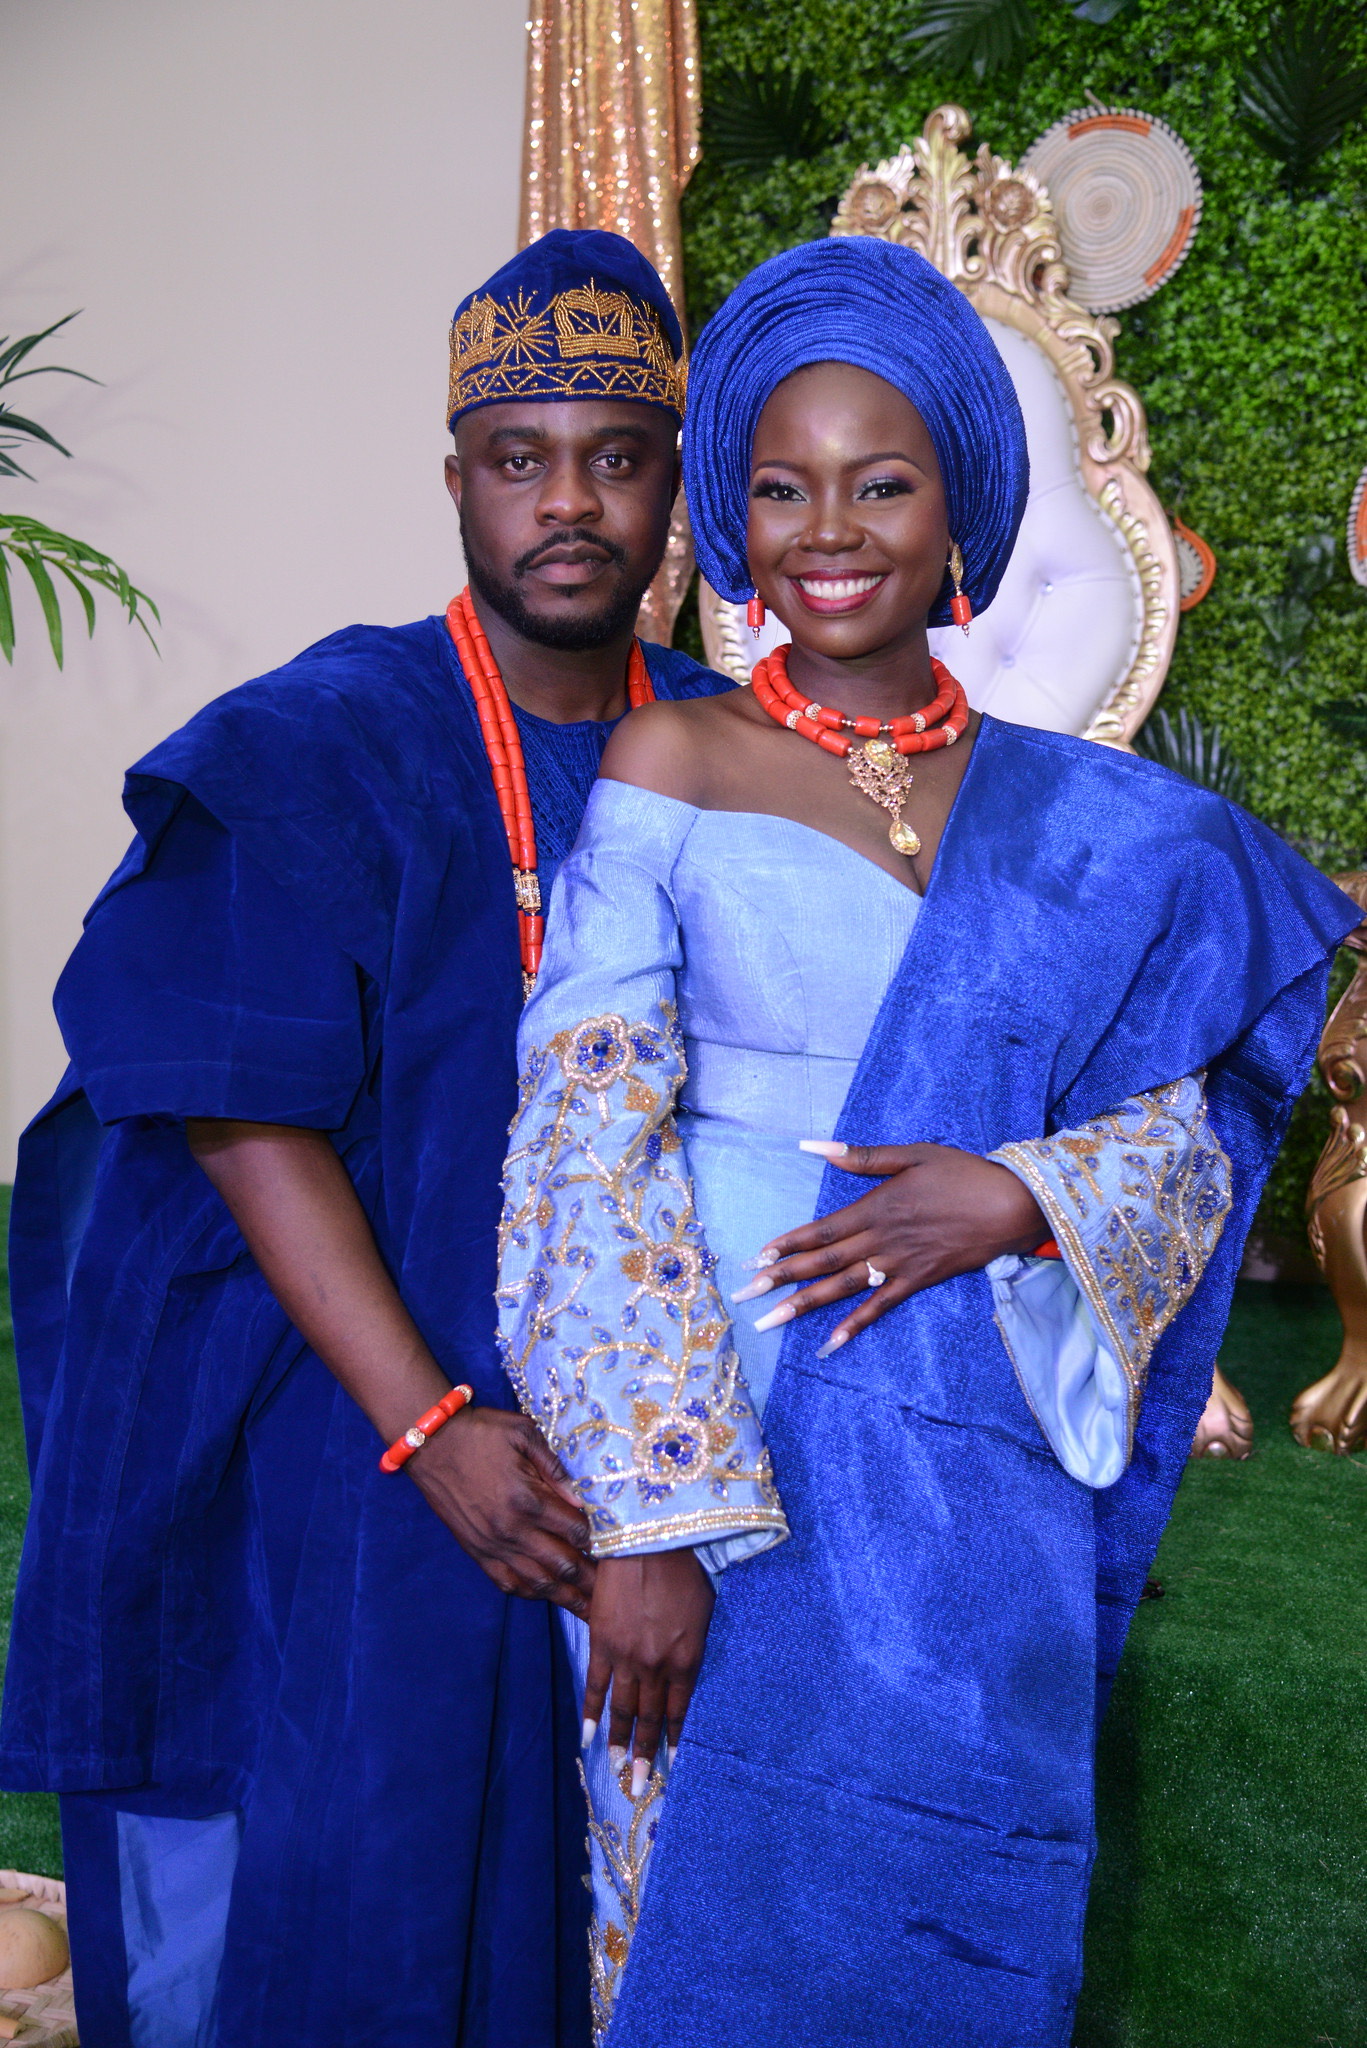 Modesola Akala and spouse dressed in blue at their wedding